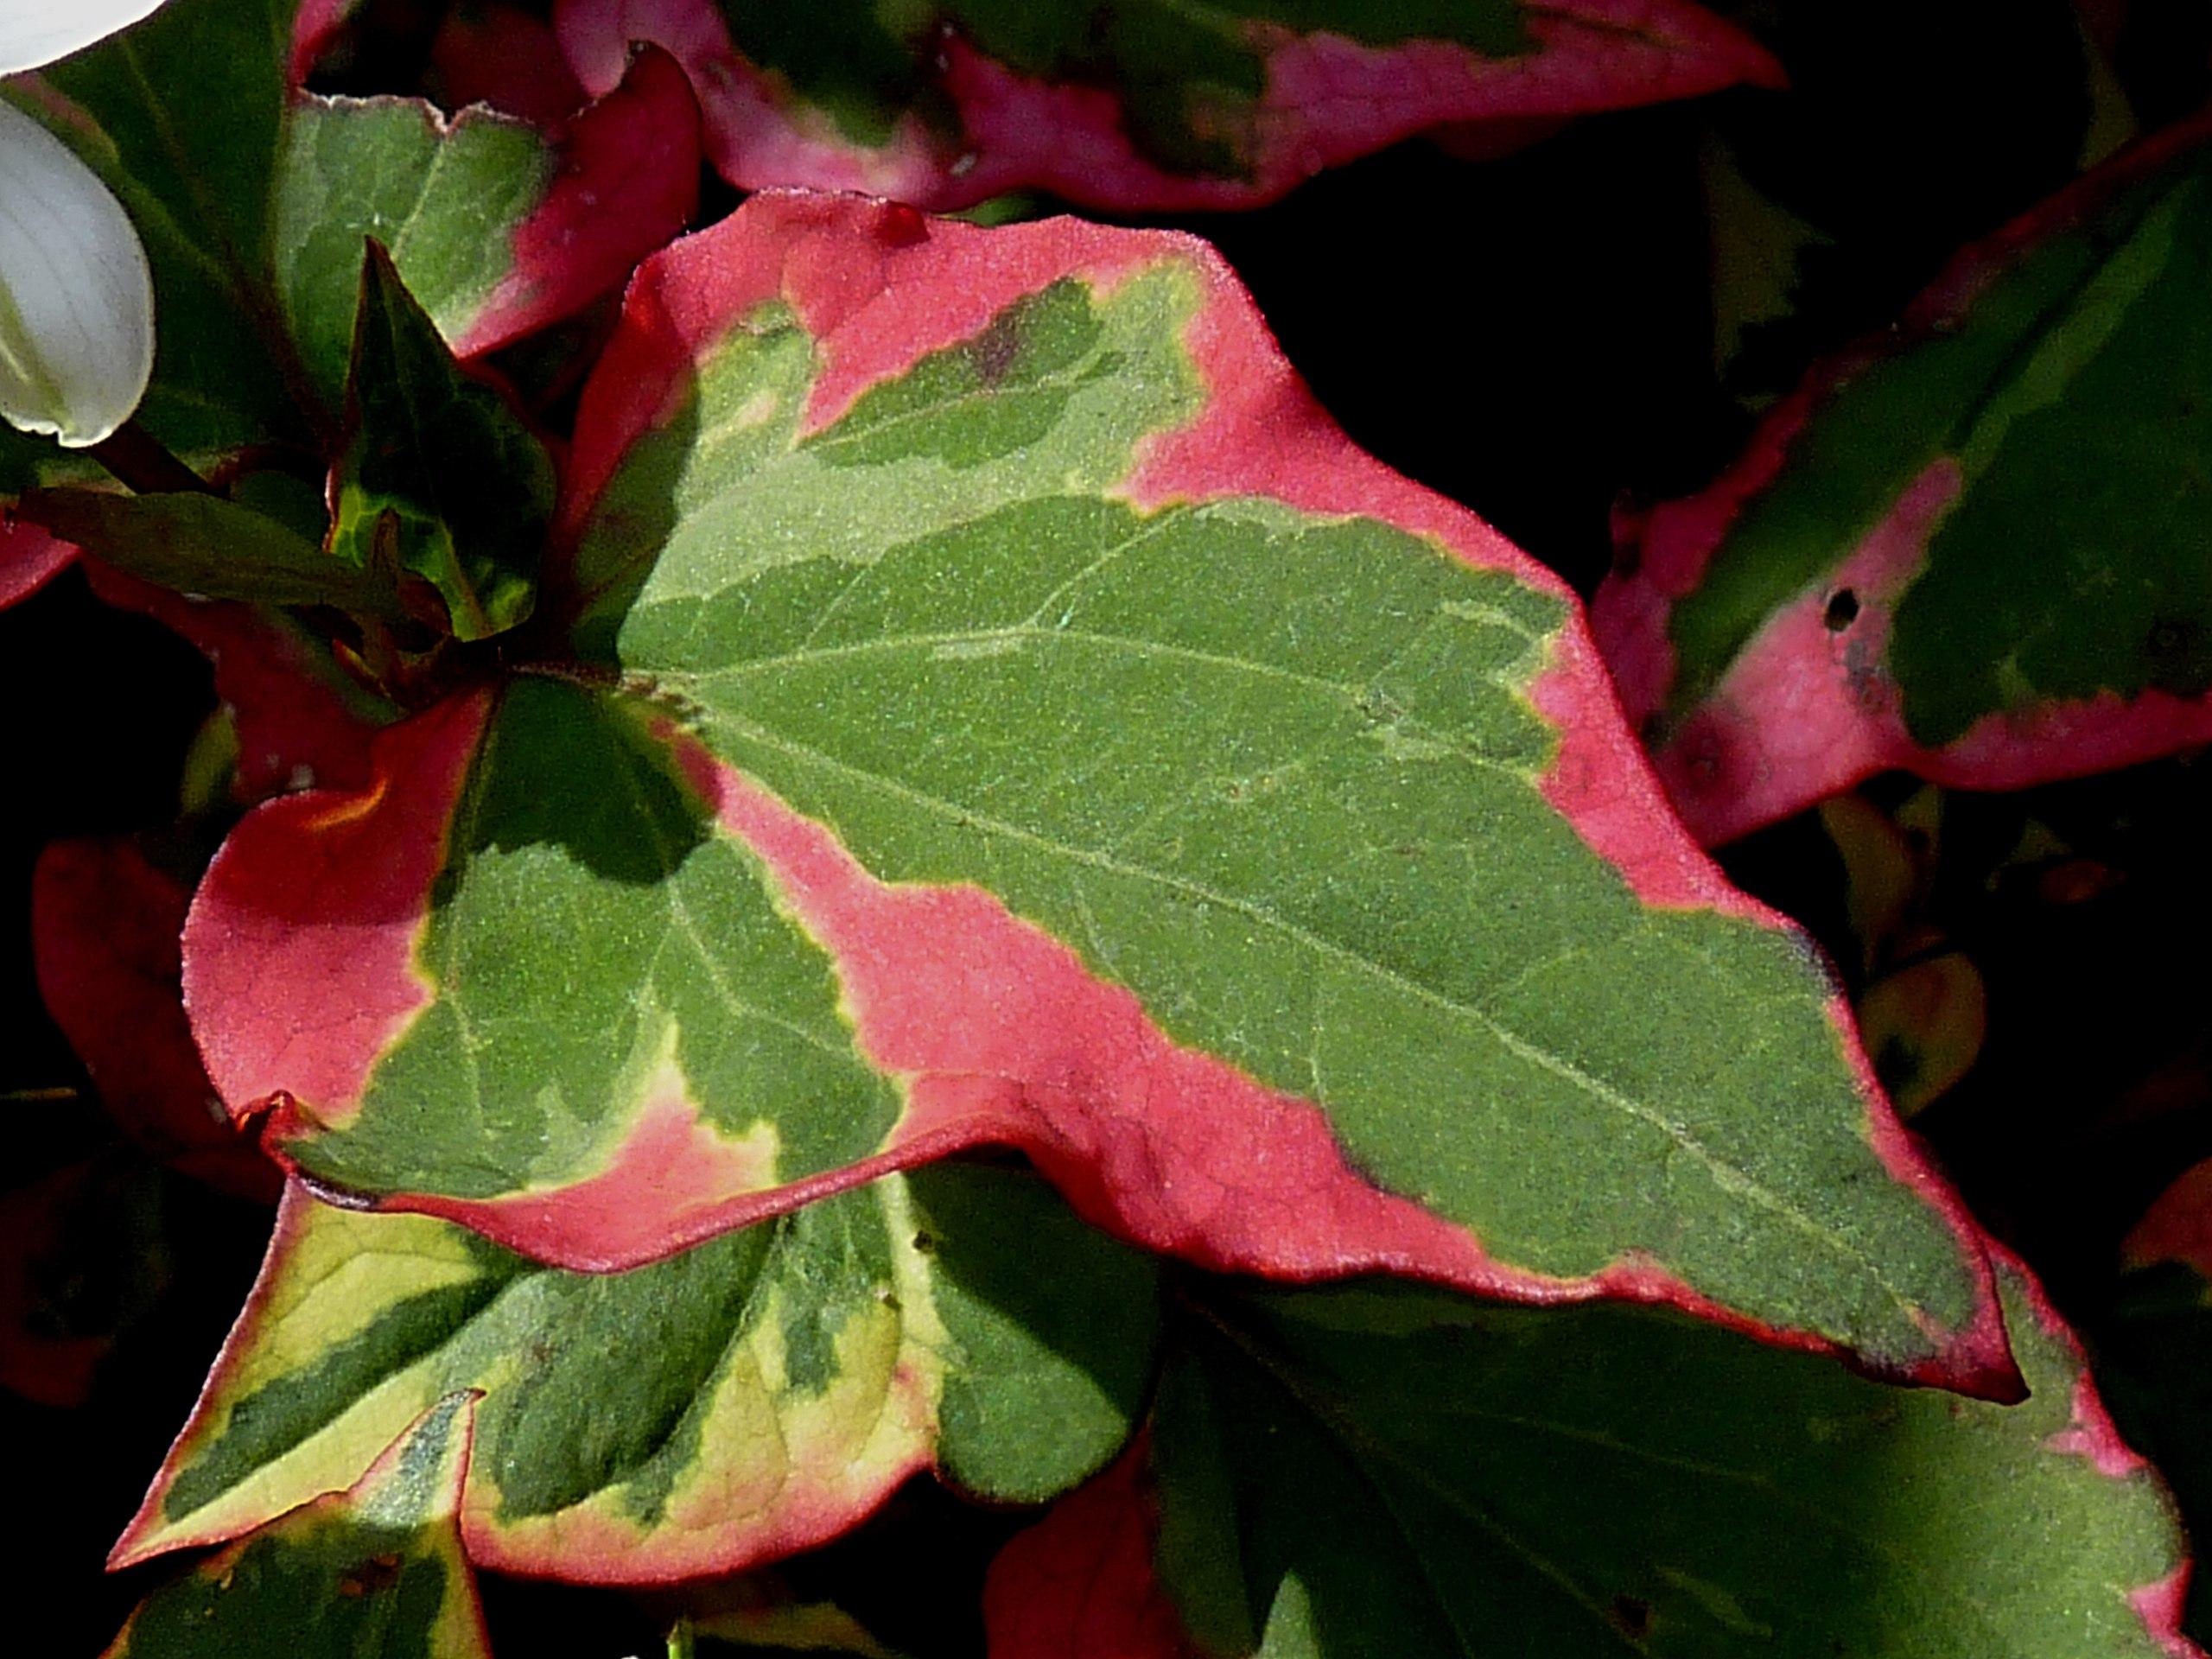 Pink-green leaves with pink blades, yellow midrib and veins.